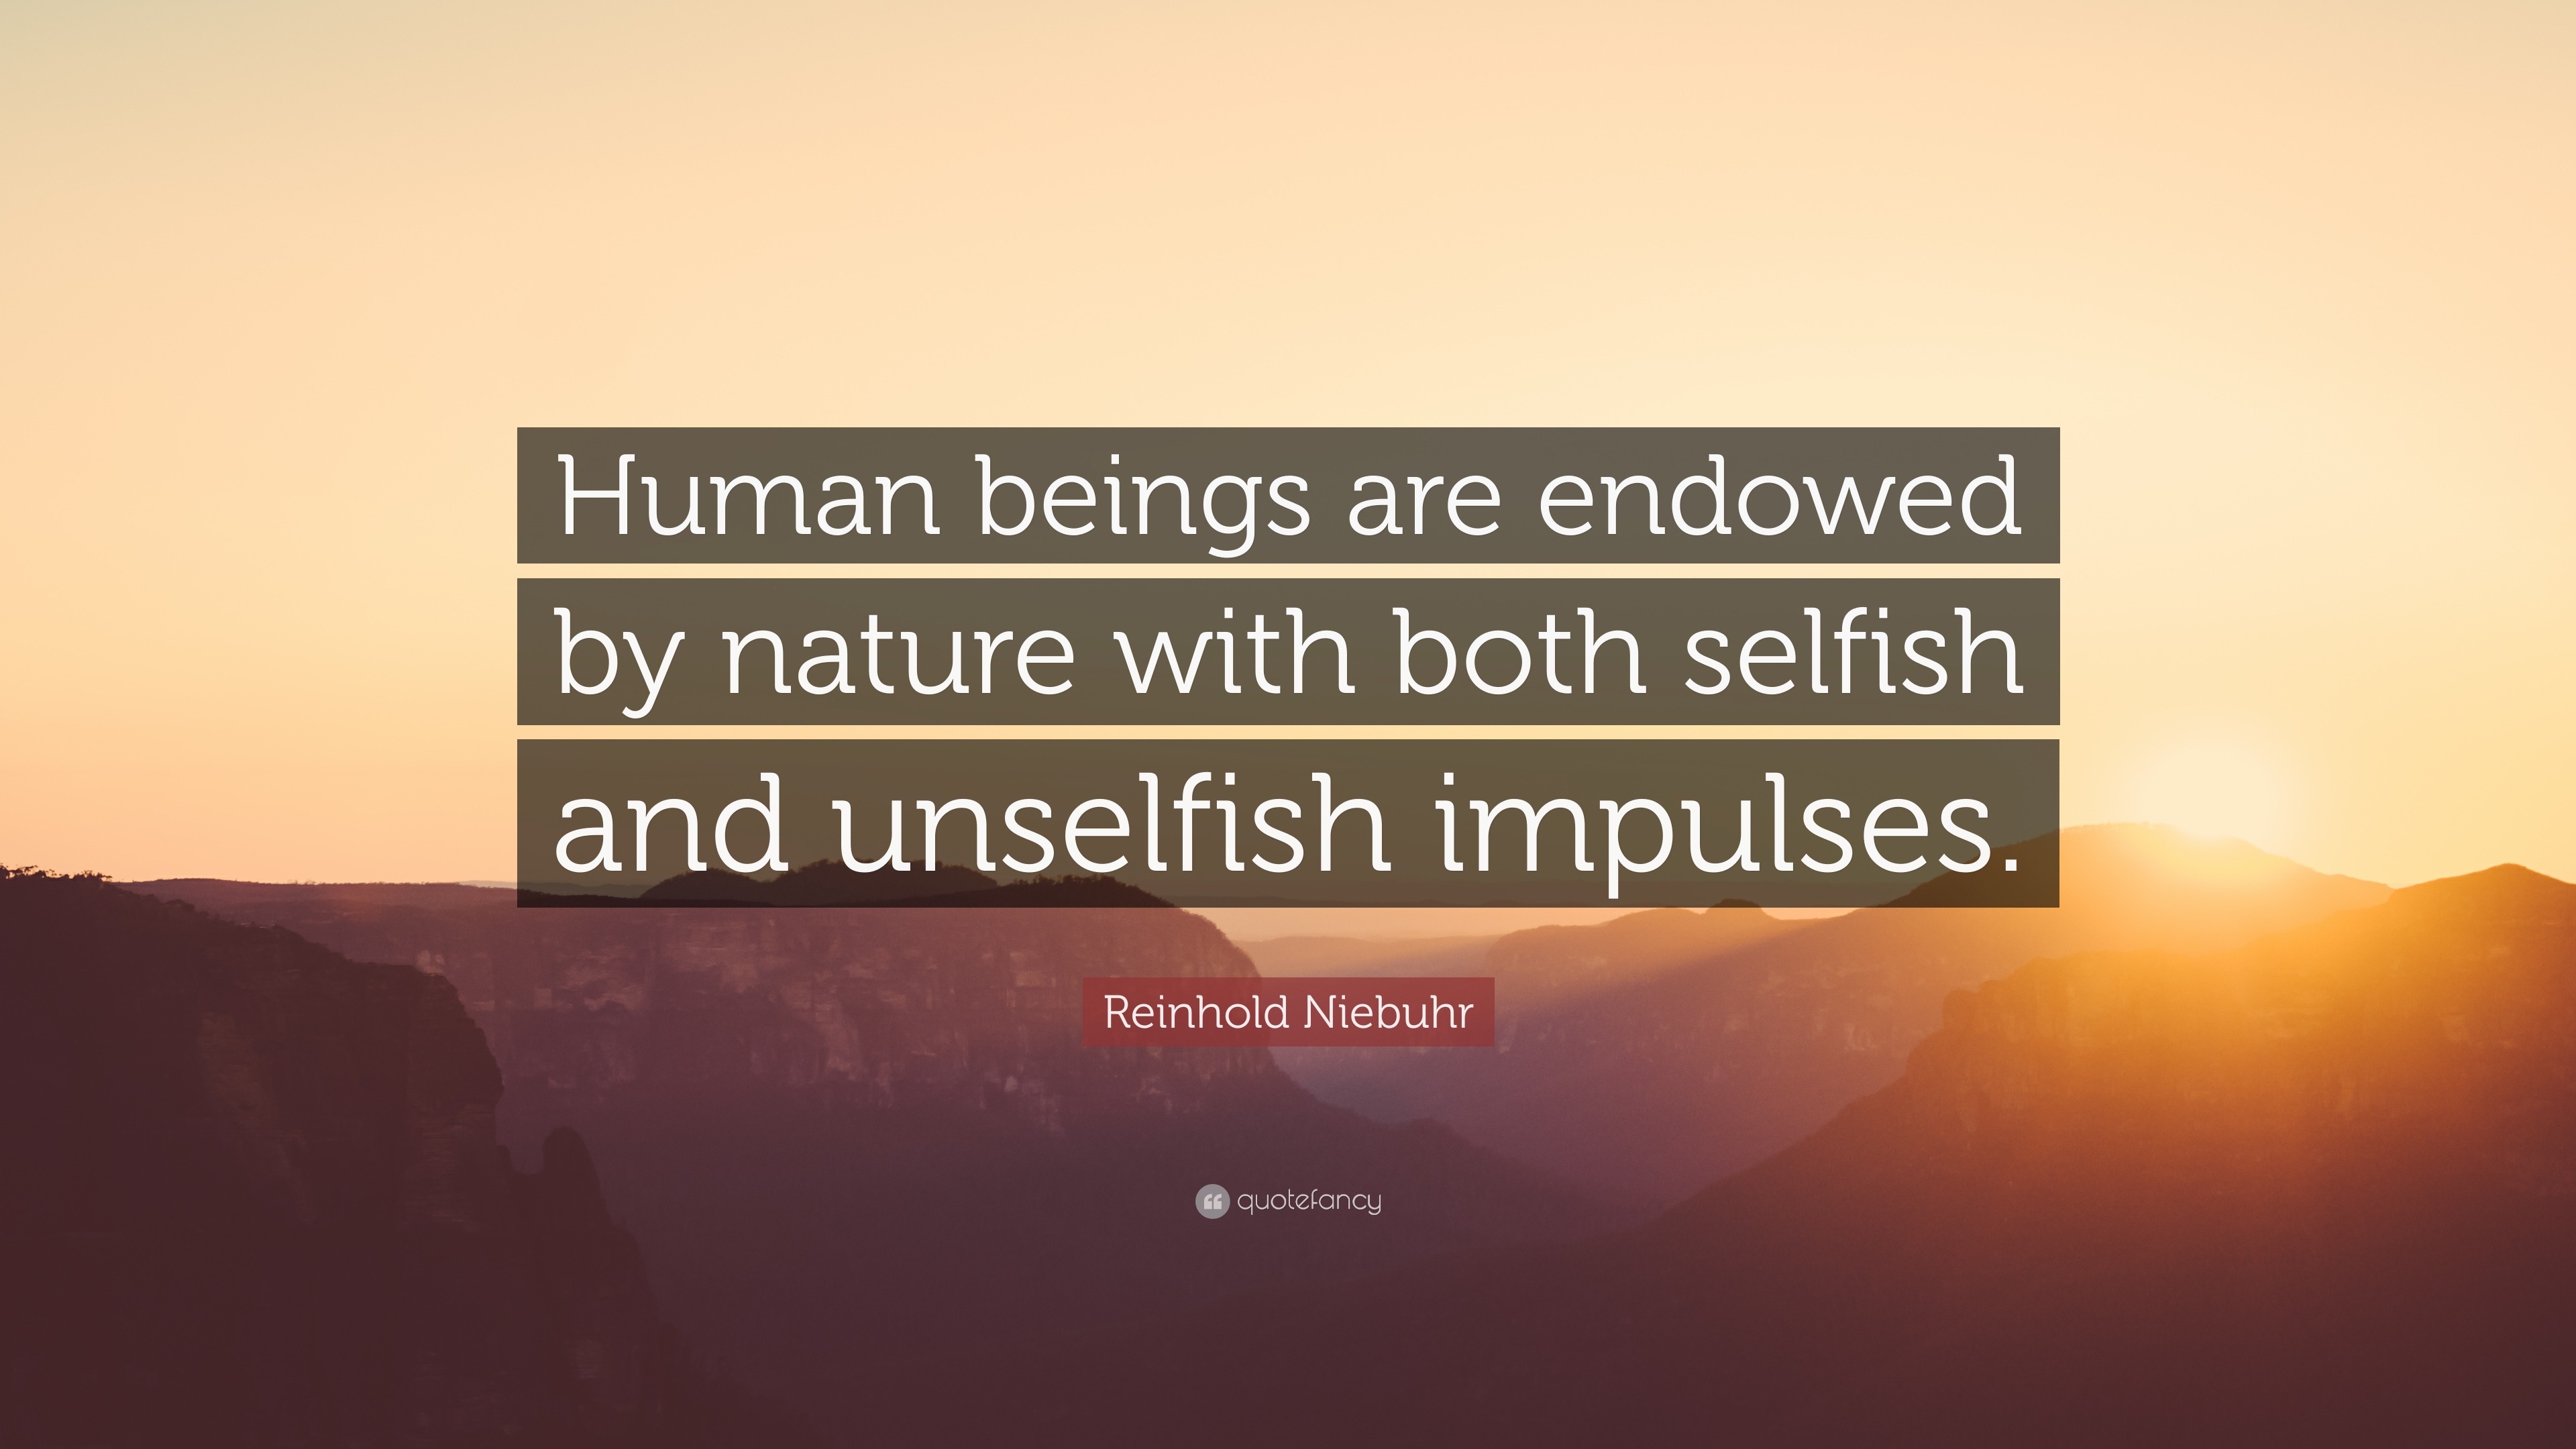 Reinhold Niebuhr Quote: “Human Beings Are Endowed By Nature With Both Selfish And Unselfish Impulses.”